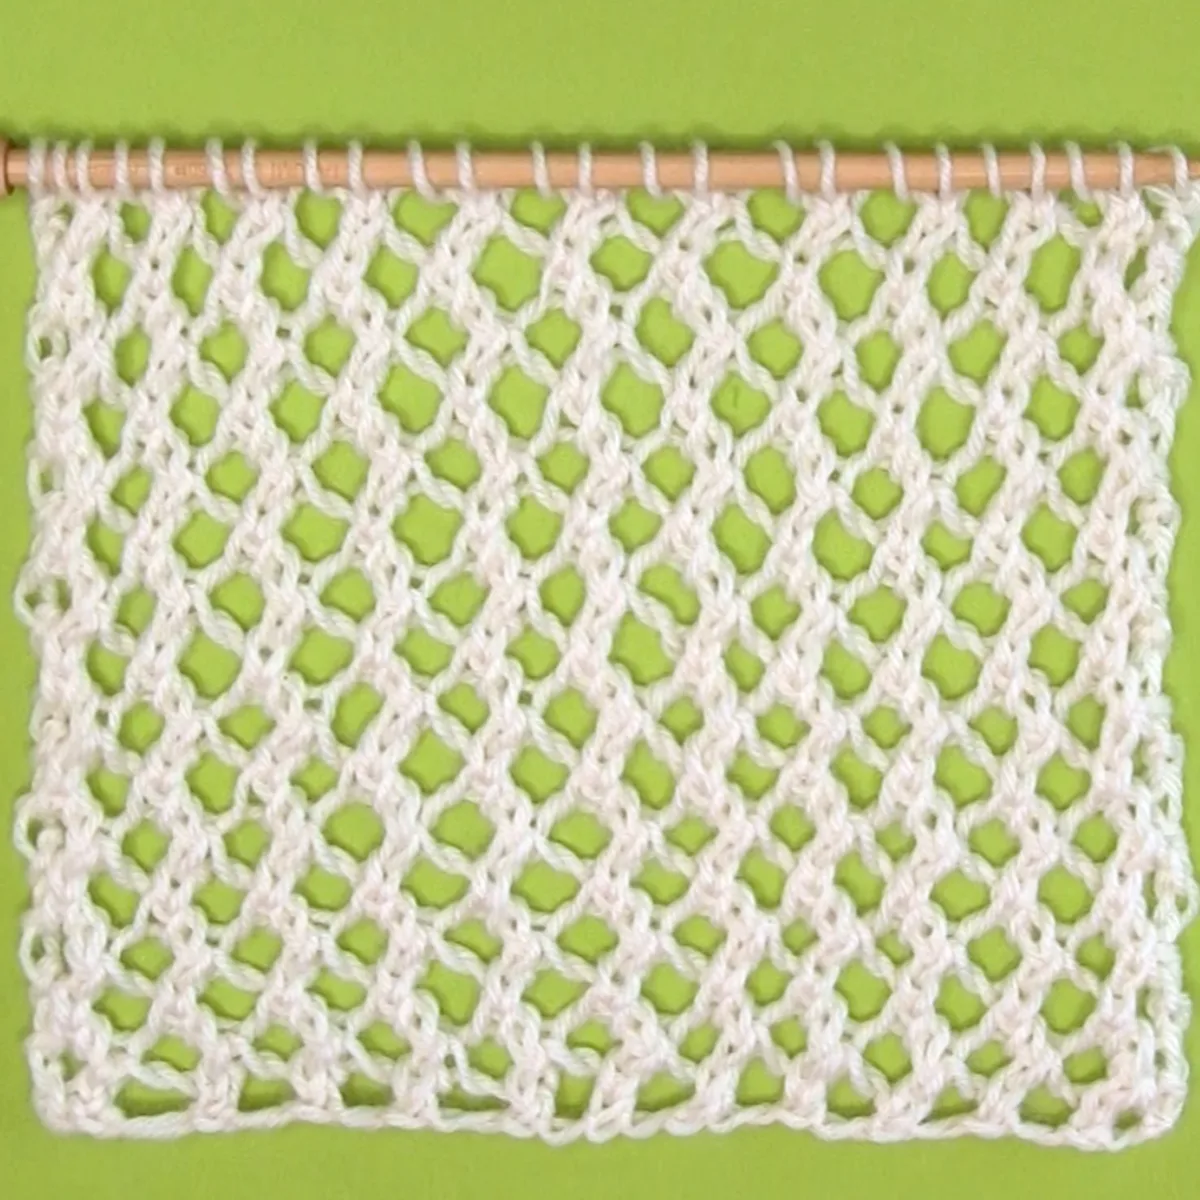 Easy Mesh Lace Knitting Pattern swatch sample in white yarn color on needle atop a green background.